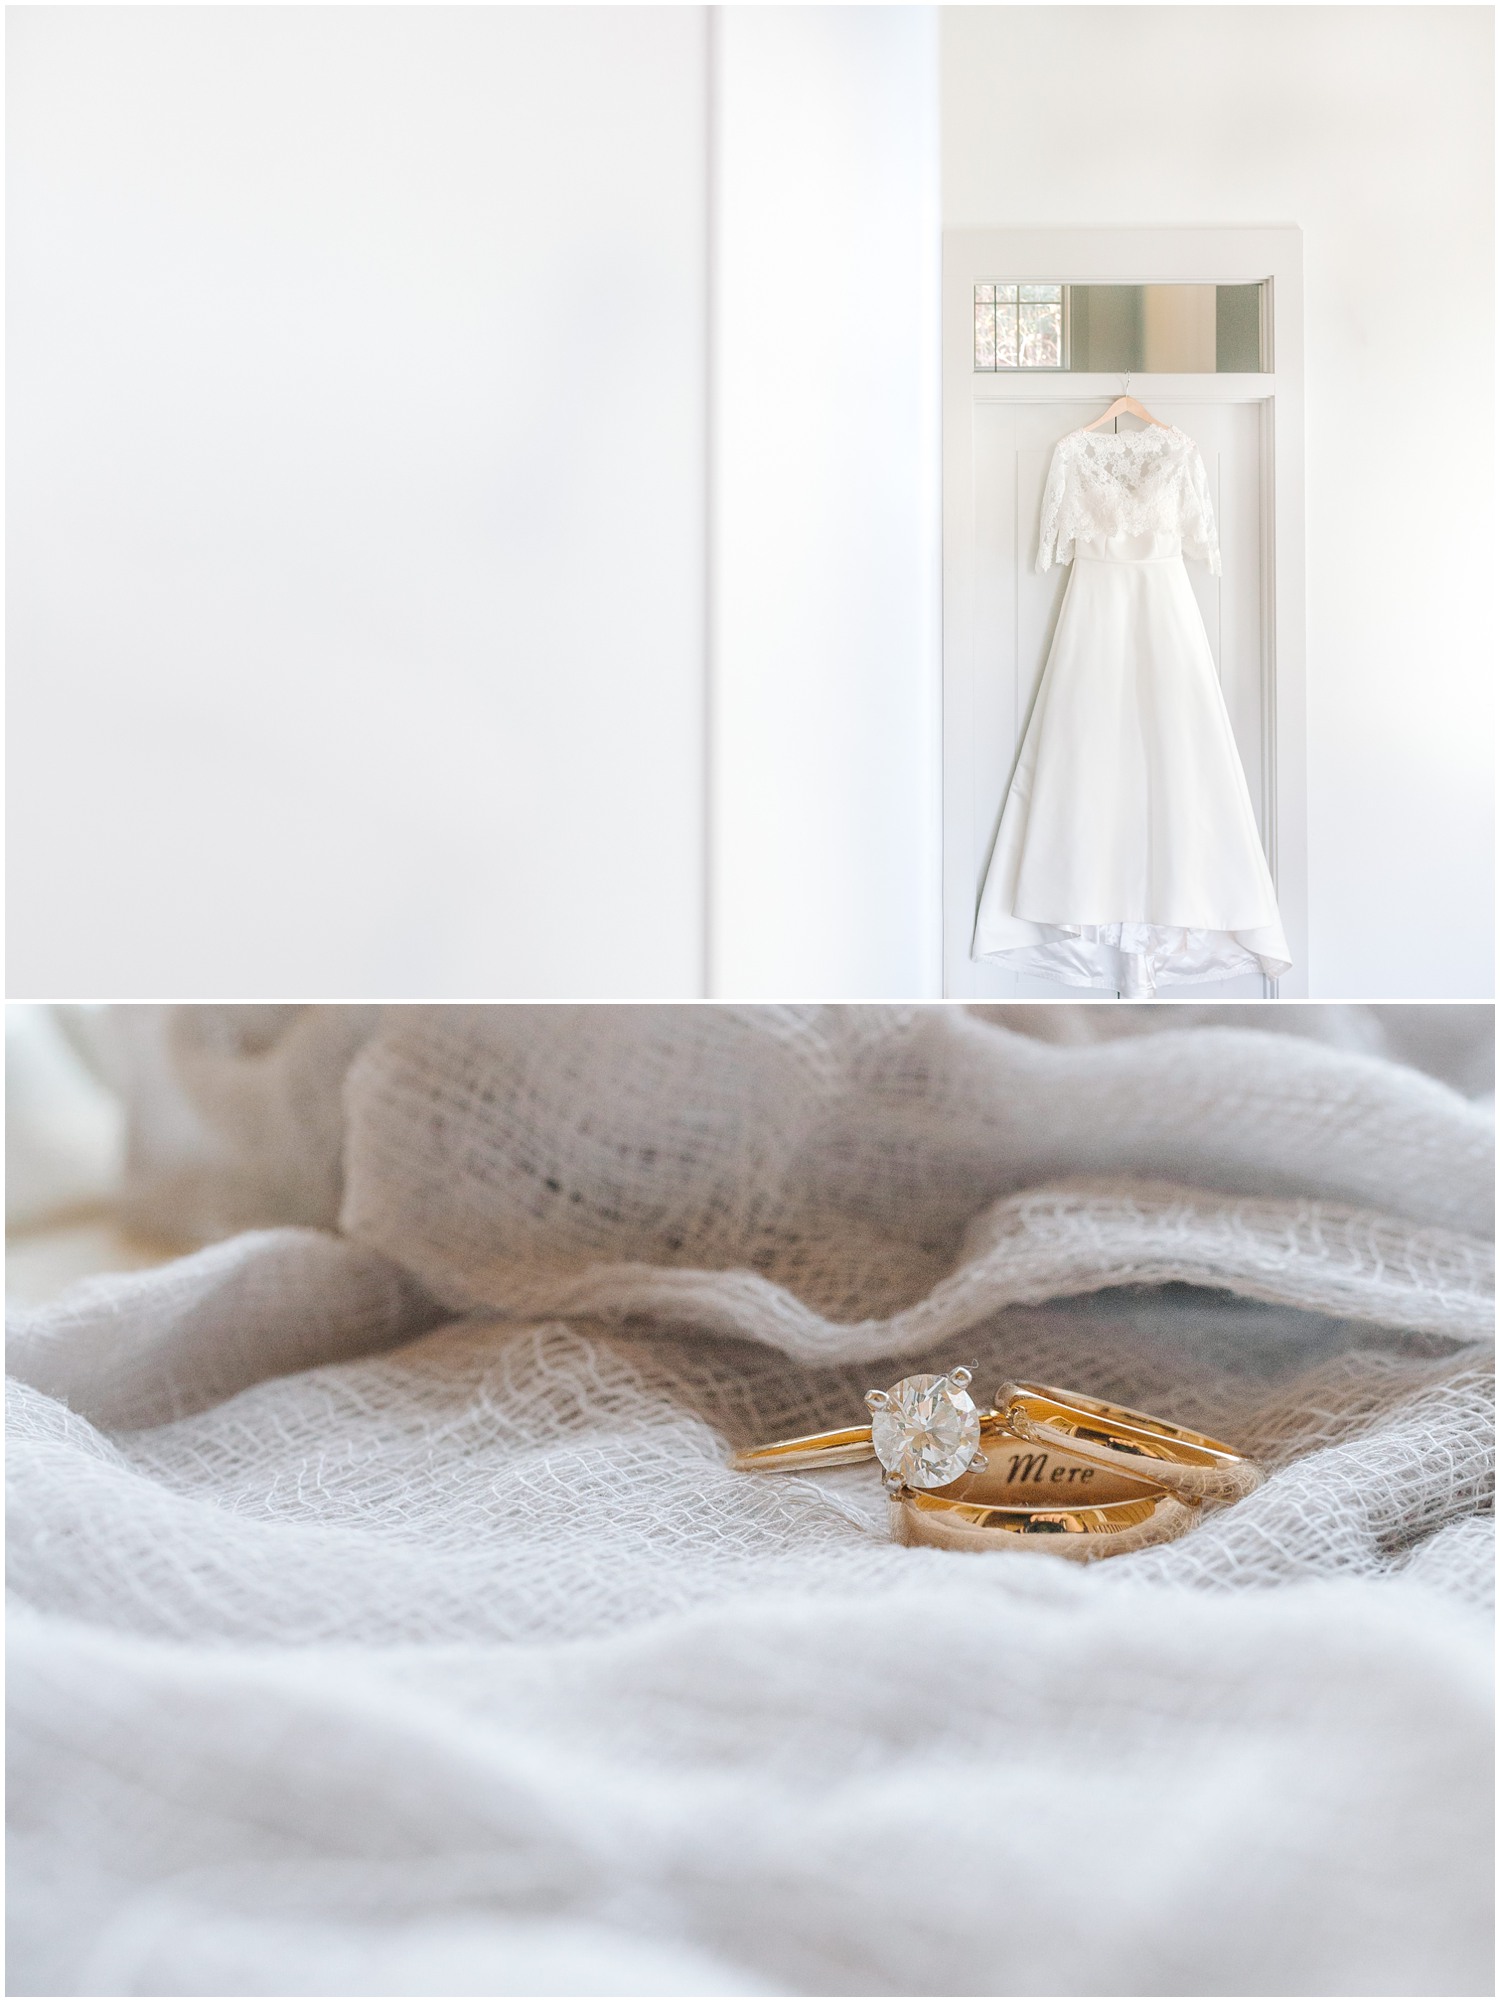 wedding rings rest on white linen with bride's dress hanging in cabin doorway